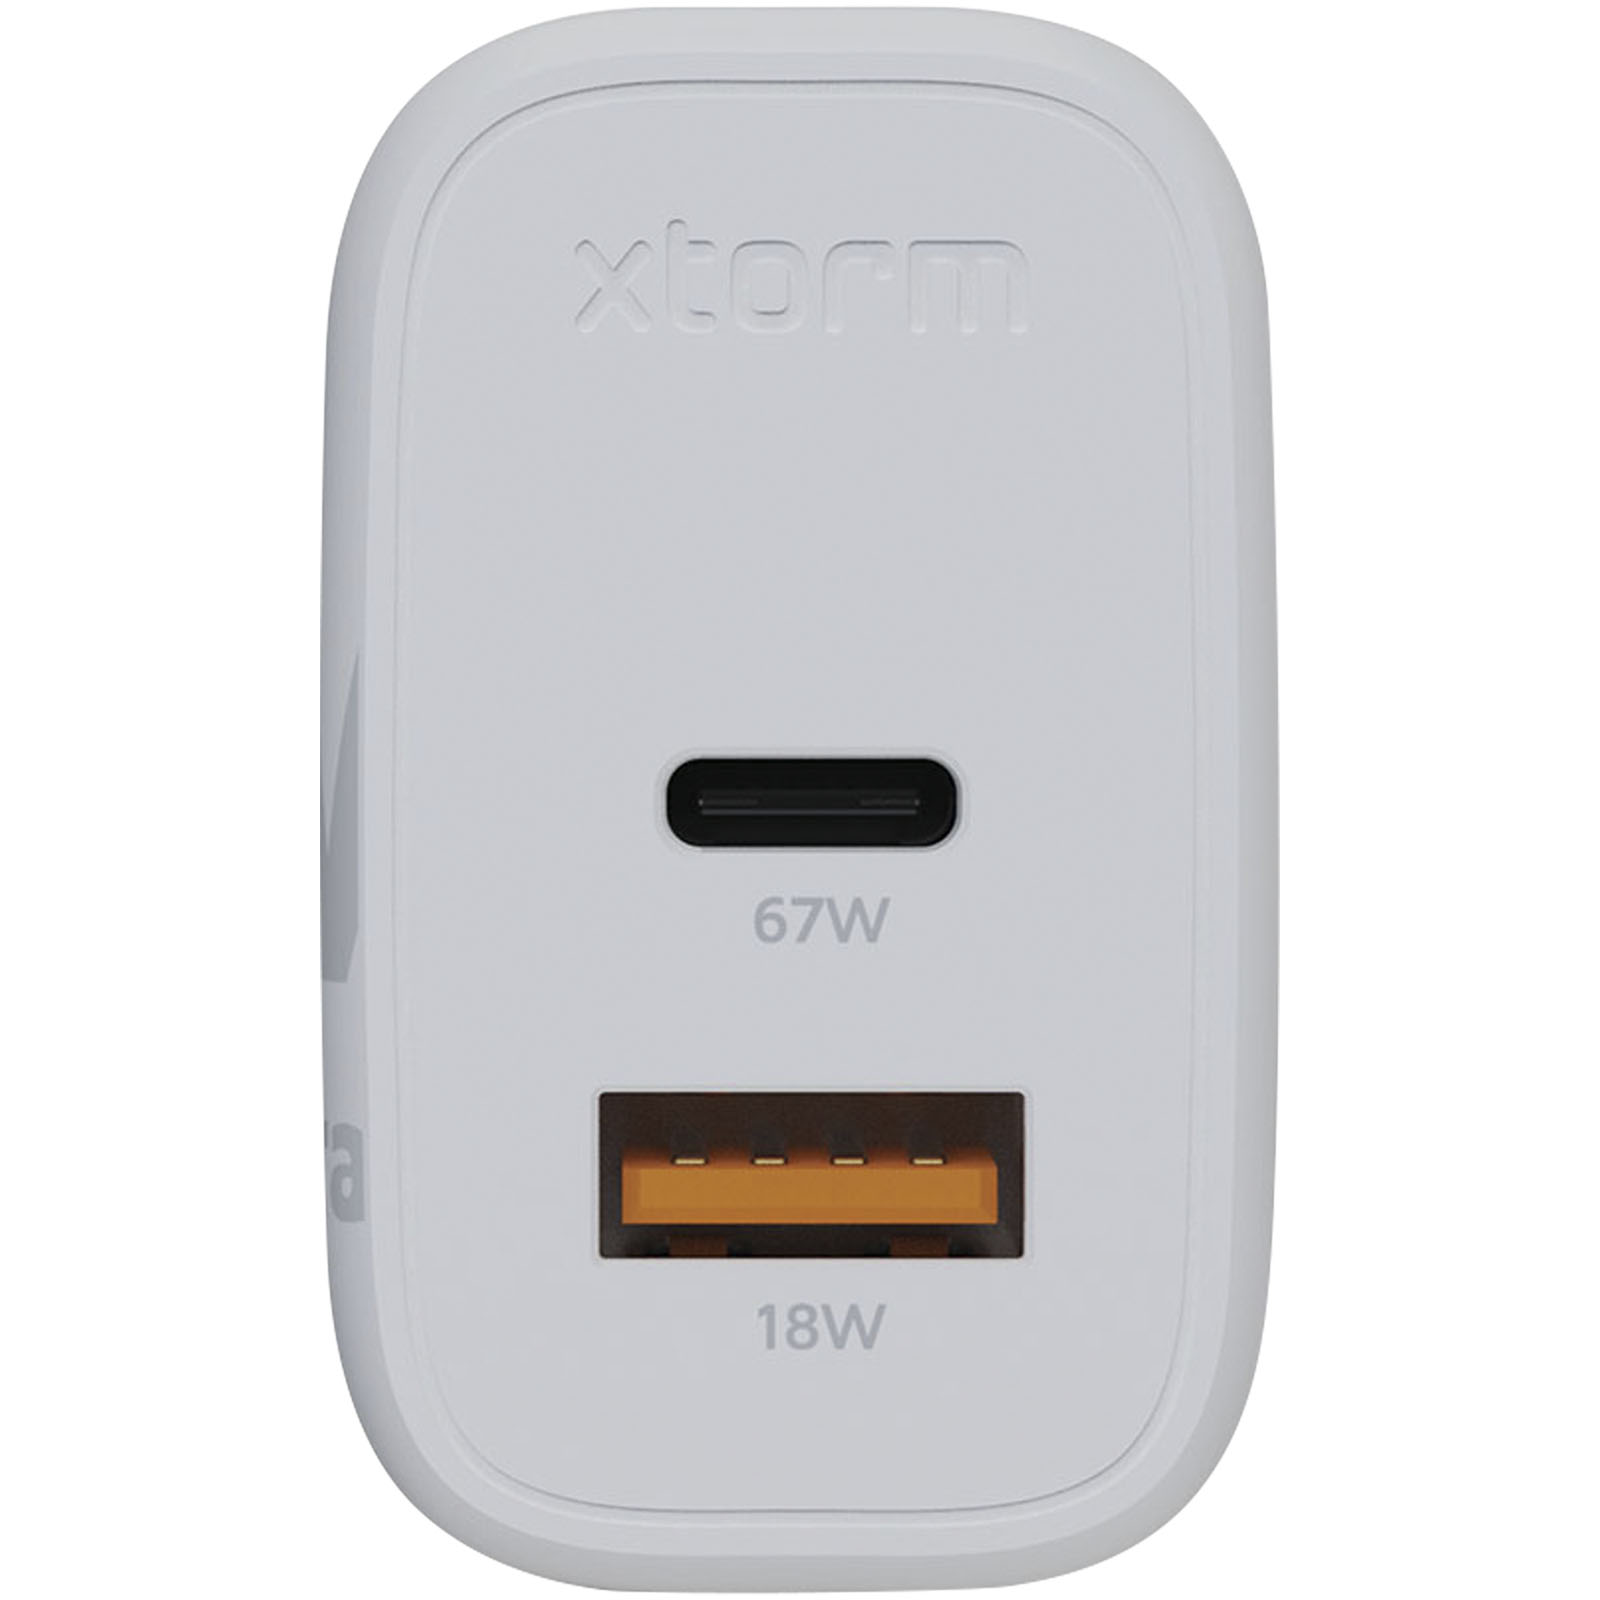 Advertising Chargers - Xtorm XEC067 GaN² Ultra 67W wall charger - 2